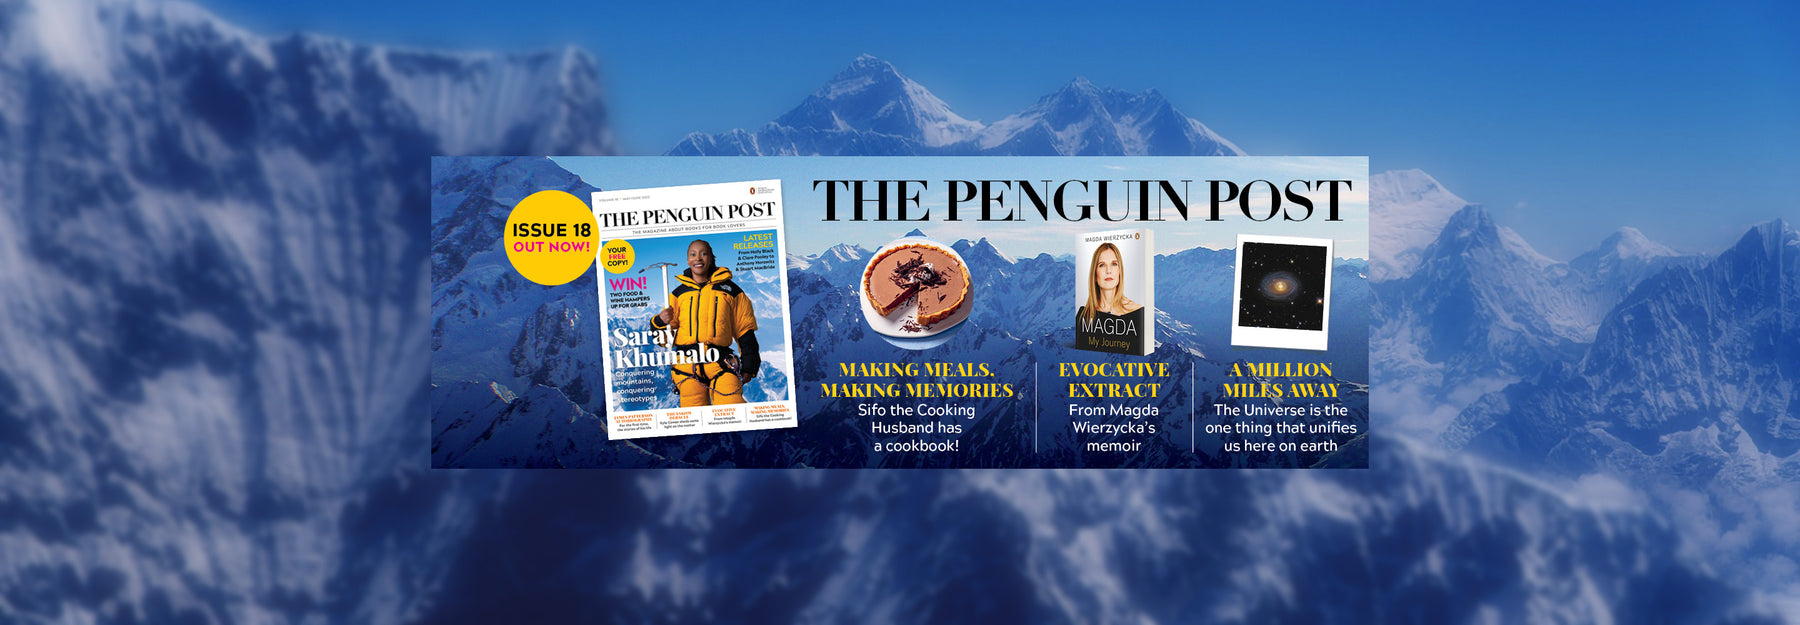 Wordsworth Special Edition of the Penguin Post for May/June